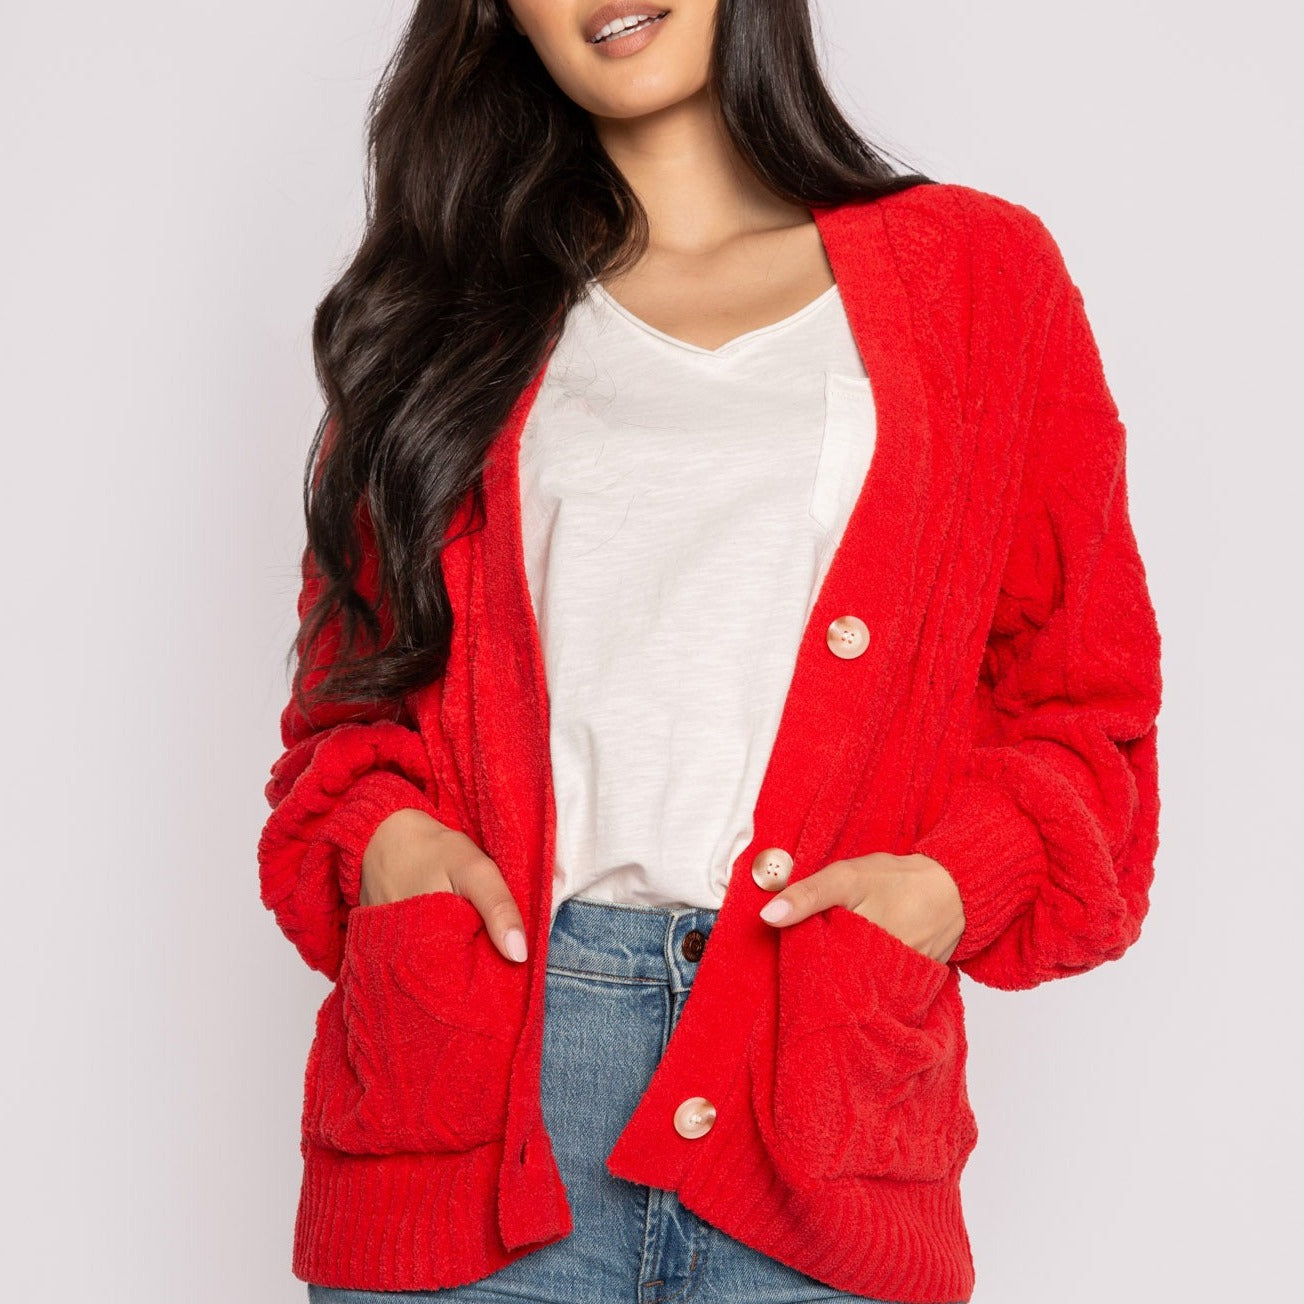 Forever Festive Cable Cardigan Sweater - RLFFCA - Scarlet Unclassified P.J. Salvage   